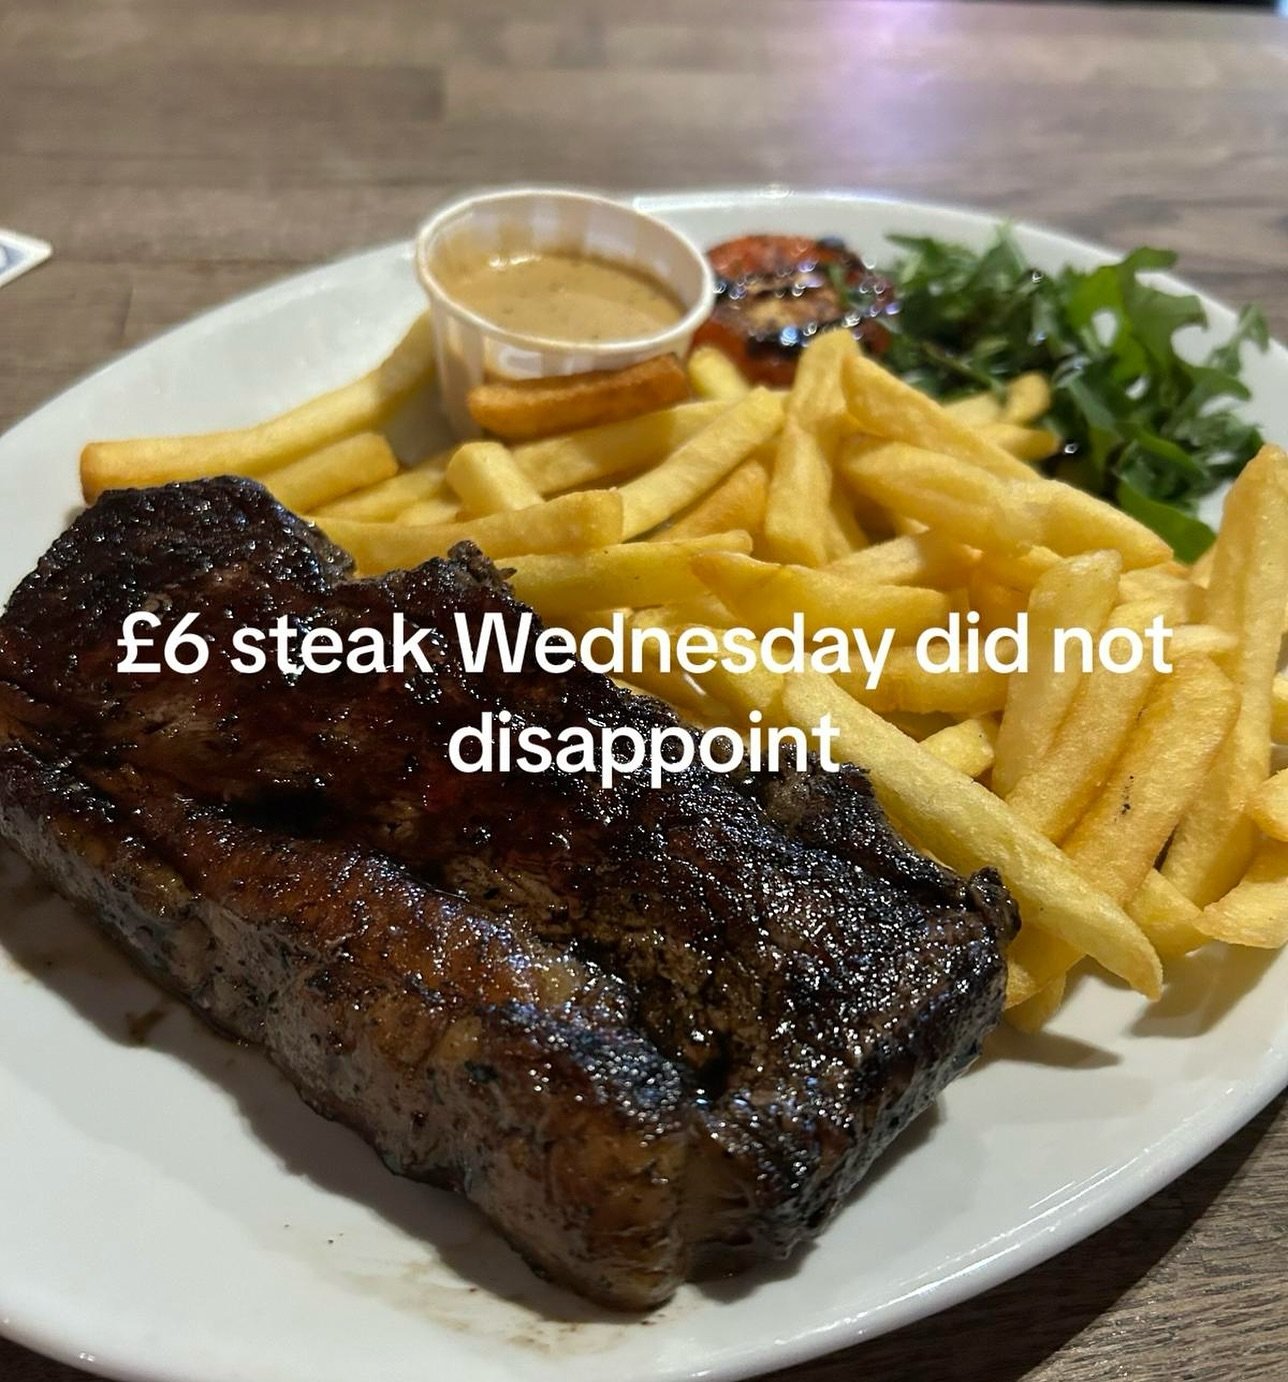 &lsquo;Steak was cooked perfectly and the peppercorn sauce was amazing!&rsquo; 📸 TikTok: debs_adas

💥IT&rsquo;S &pound;6 STEAK WEDNESDAY 💥

Join us for another day of meaty madness where you can enjoy a 6oz sirloin steak with fries, veg and our in